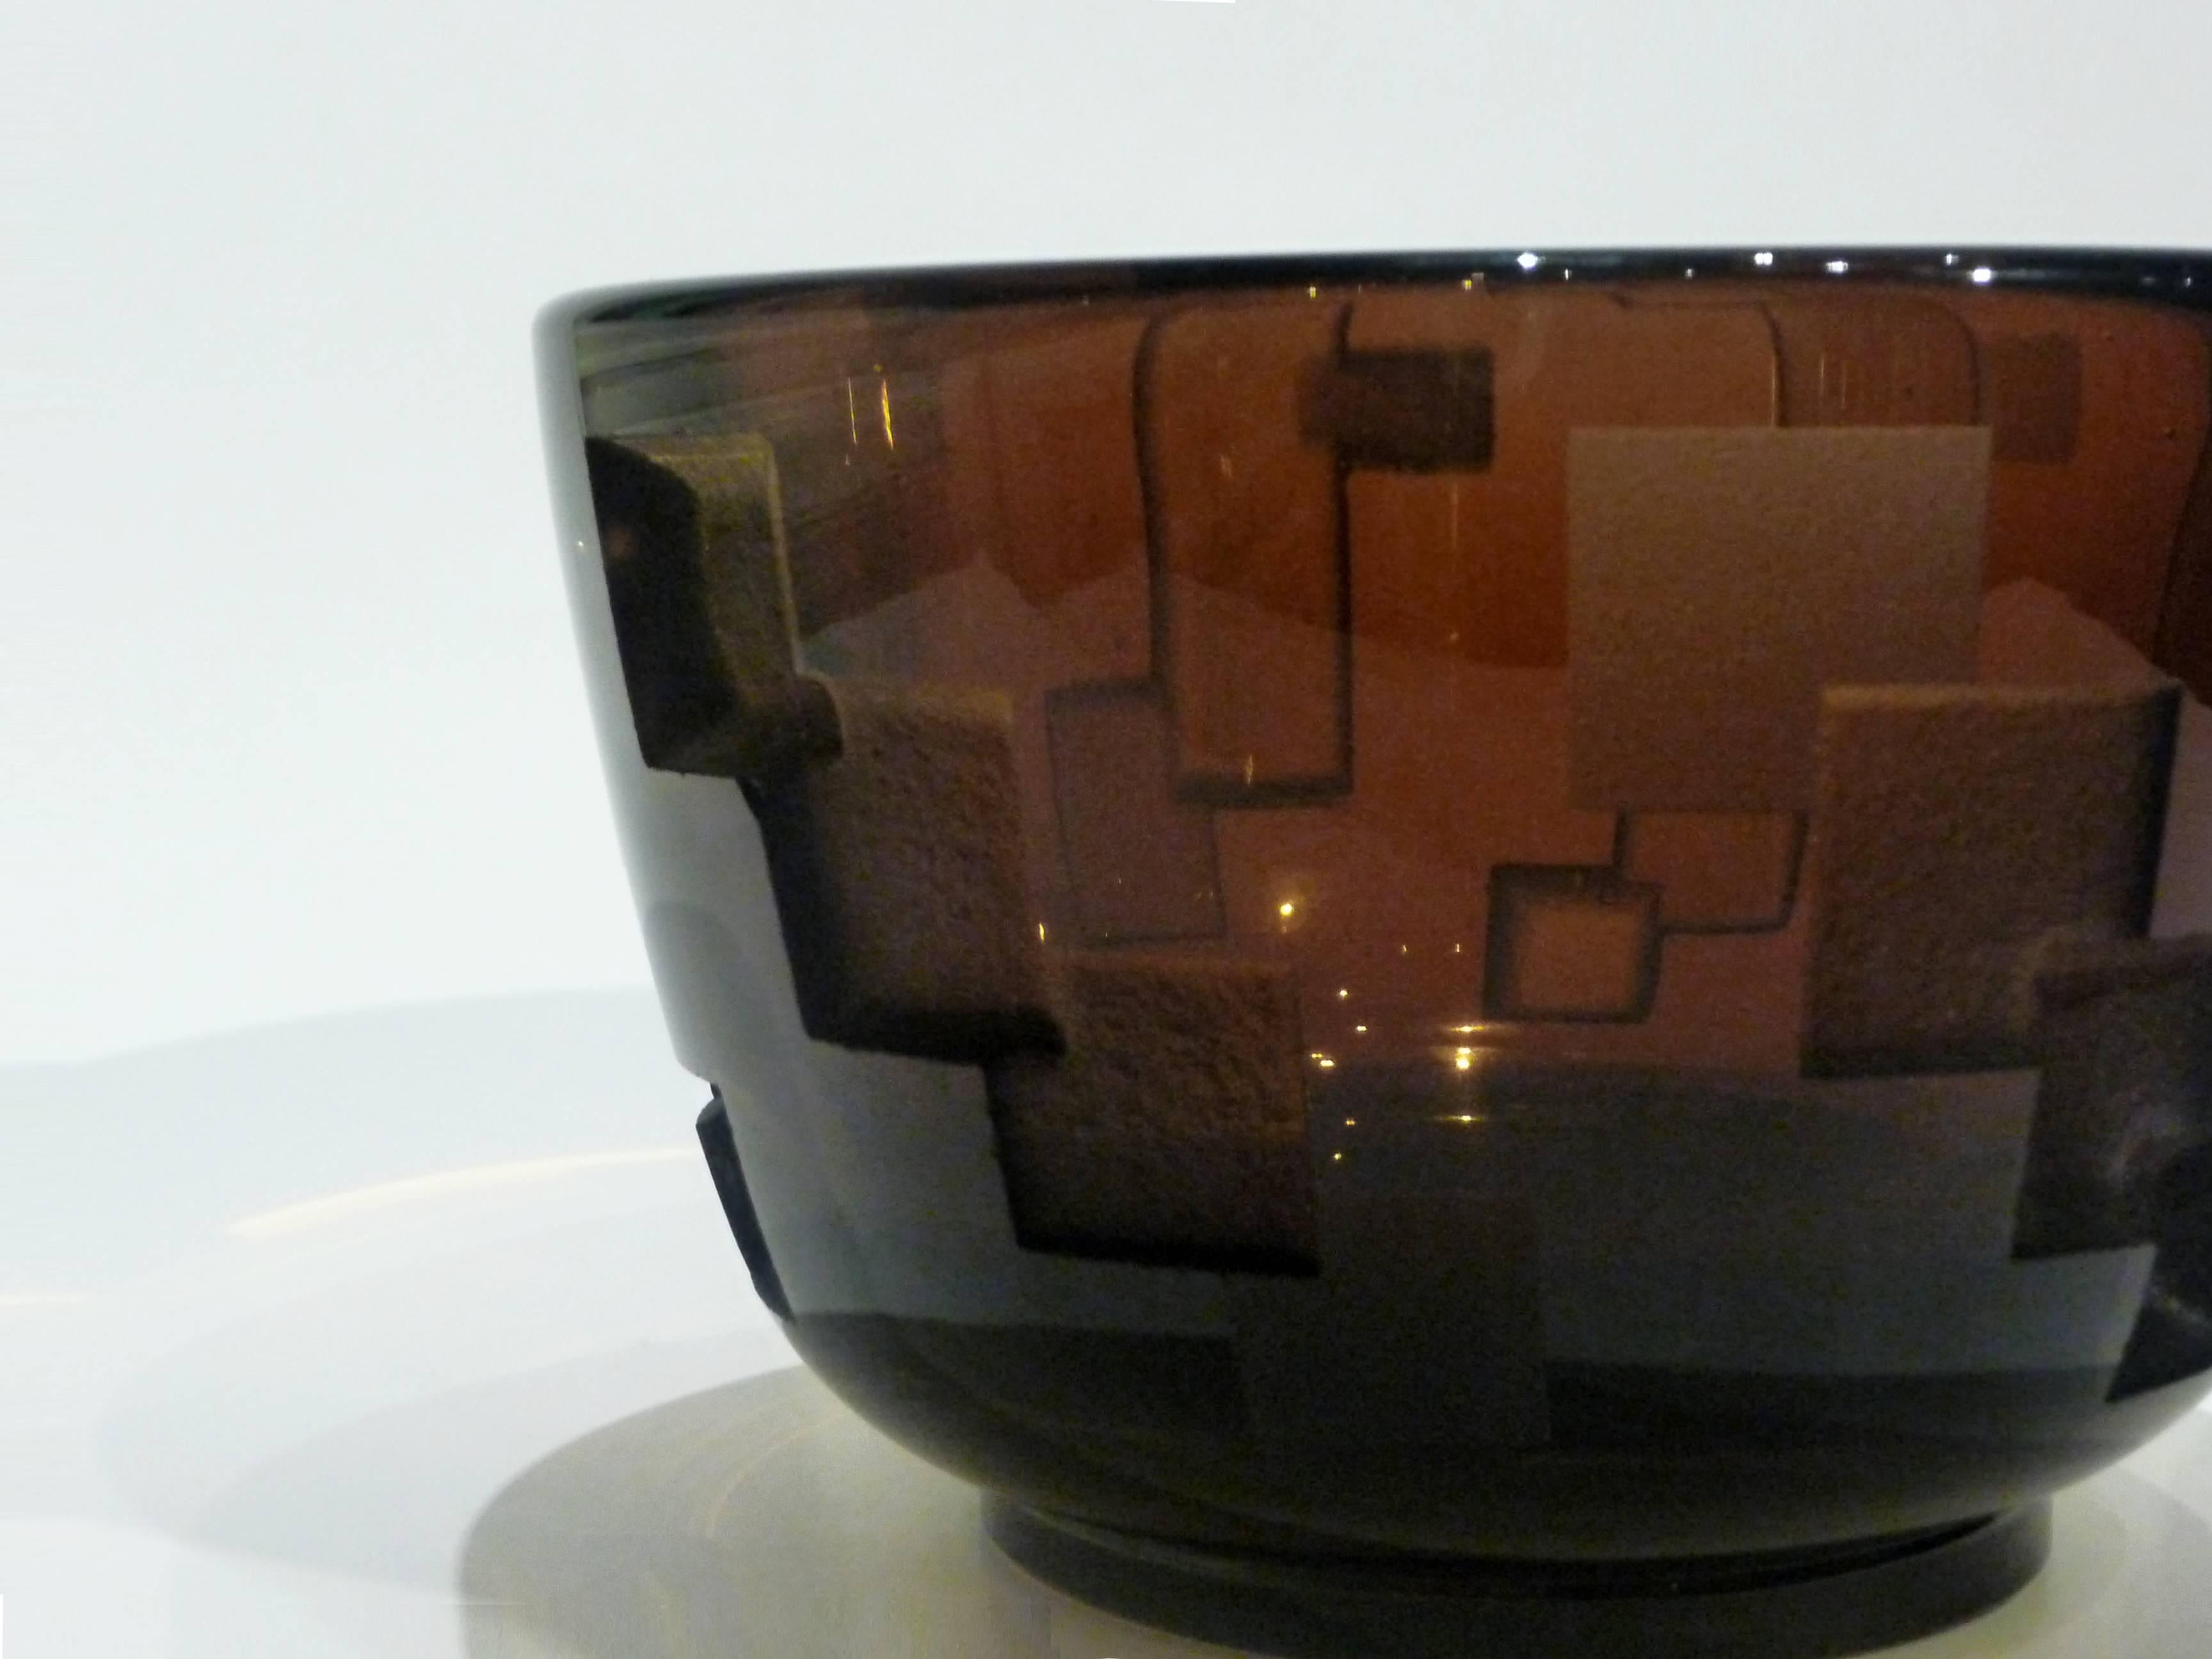 Jean Luce
An Art Deco bowl
Thick amber glass deeply etched with rows of overlapping squares
Signed underneath with the artist’s monogram.